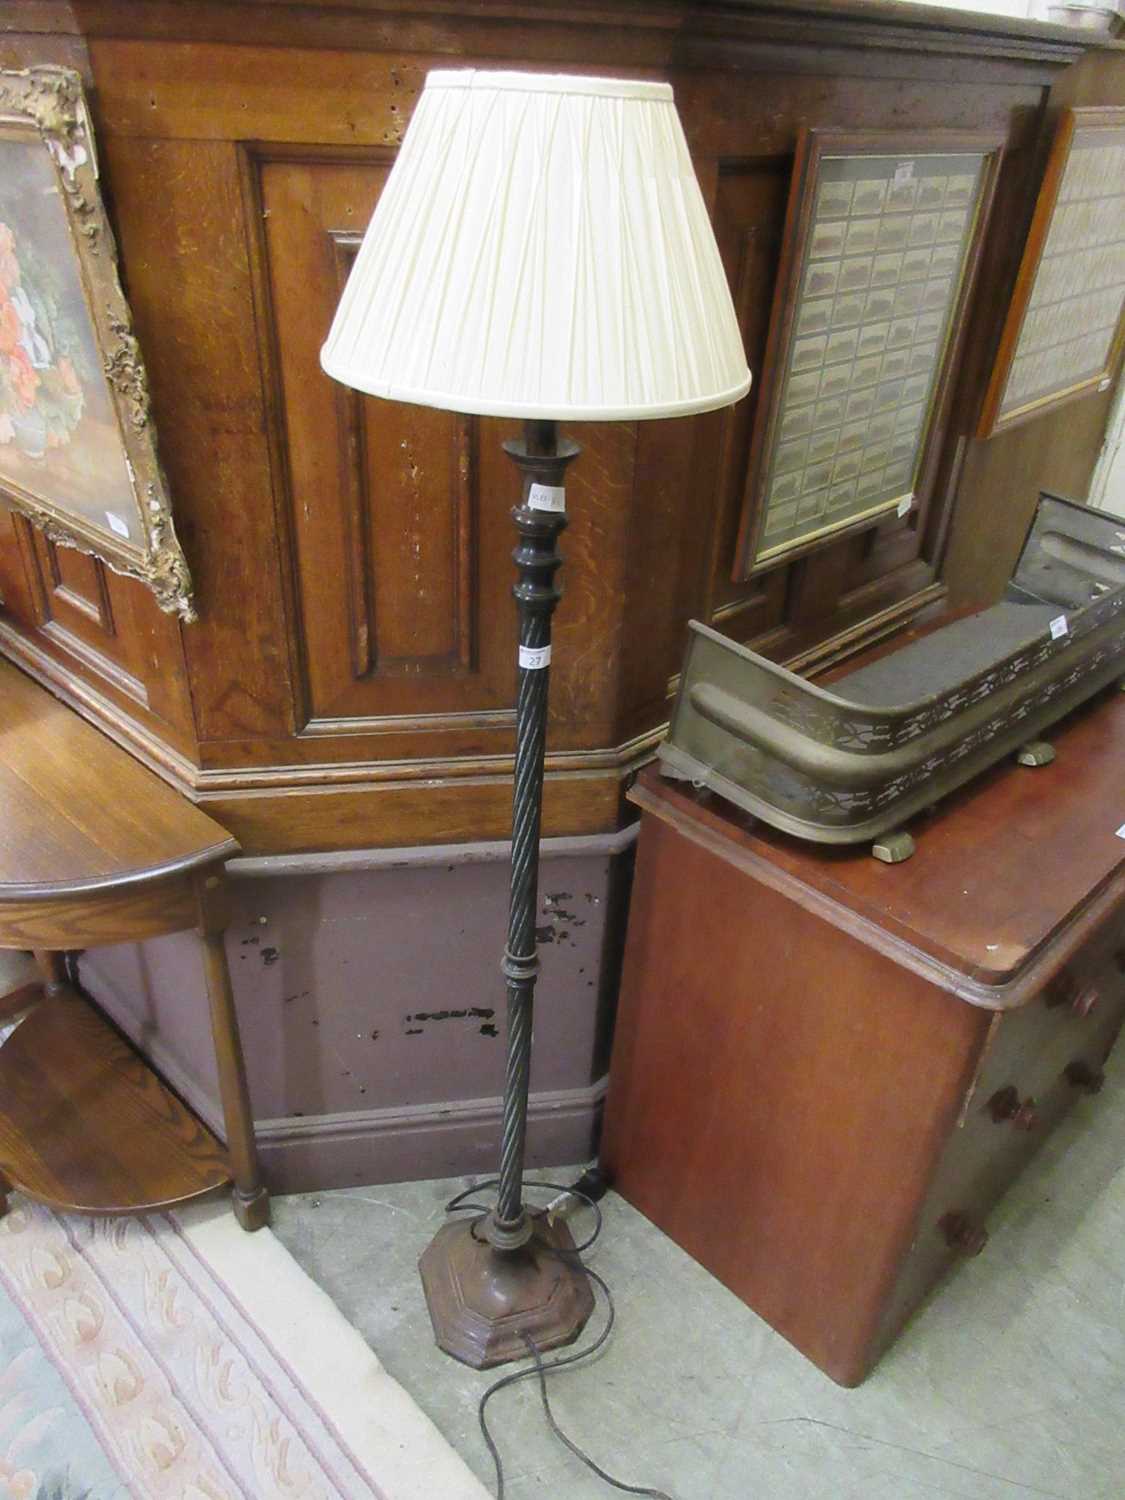 A reproduction twisted stemmed metal standard lampThe lamp is definitely made of metal. Unsure of